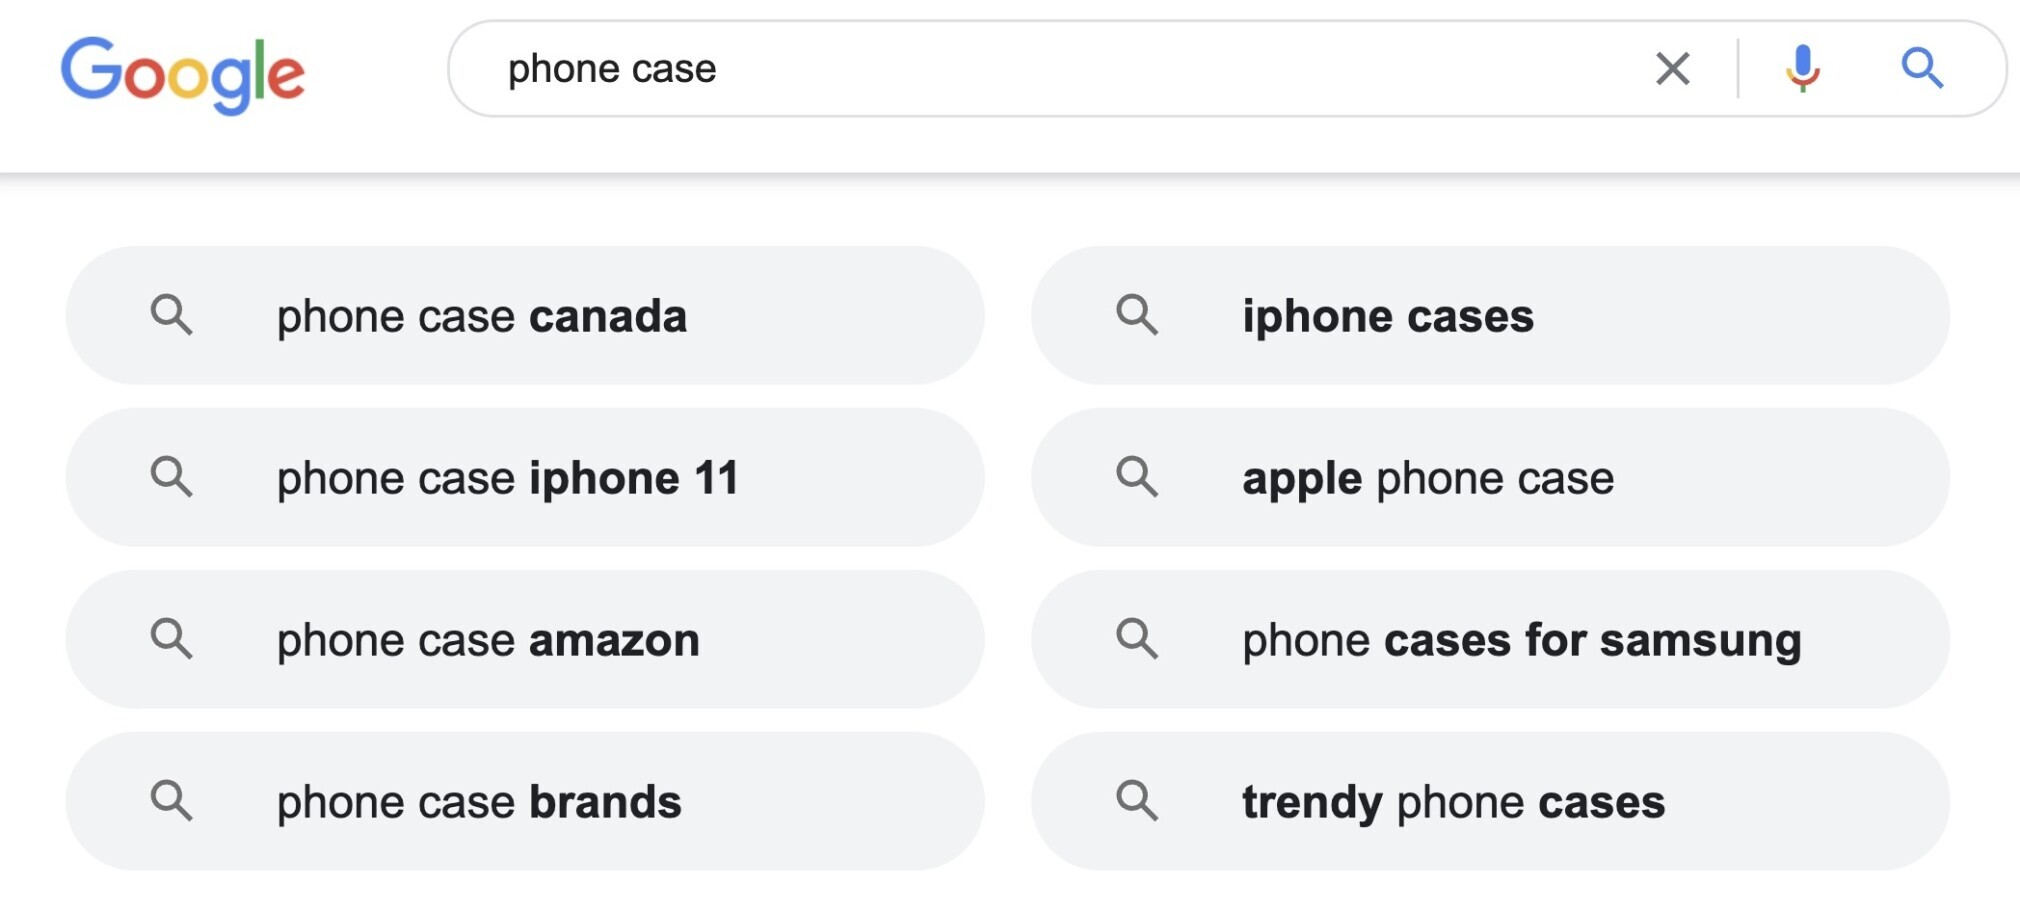 Related searches for "phone case"